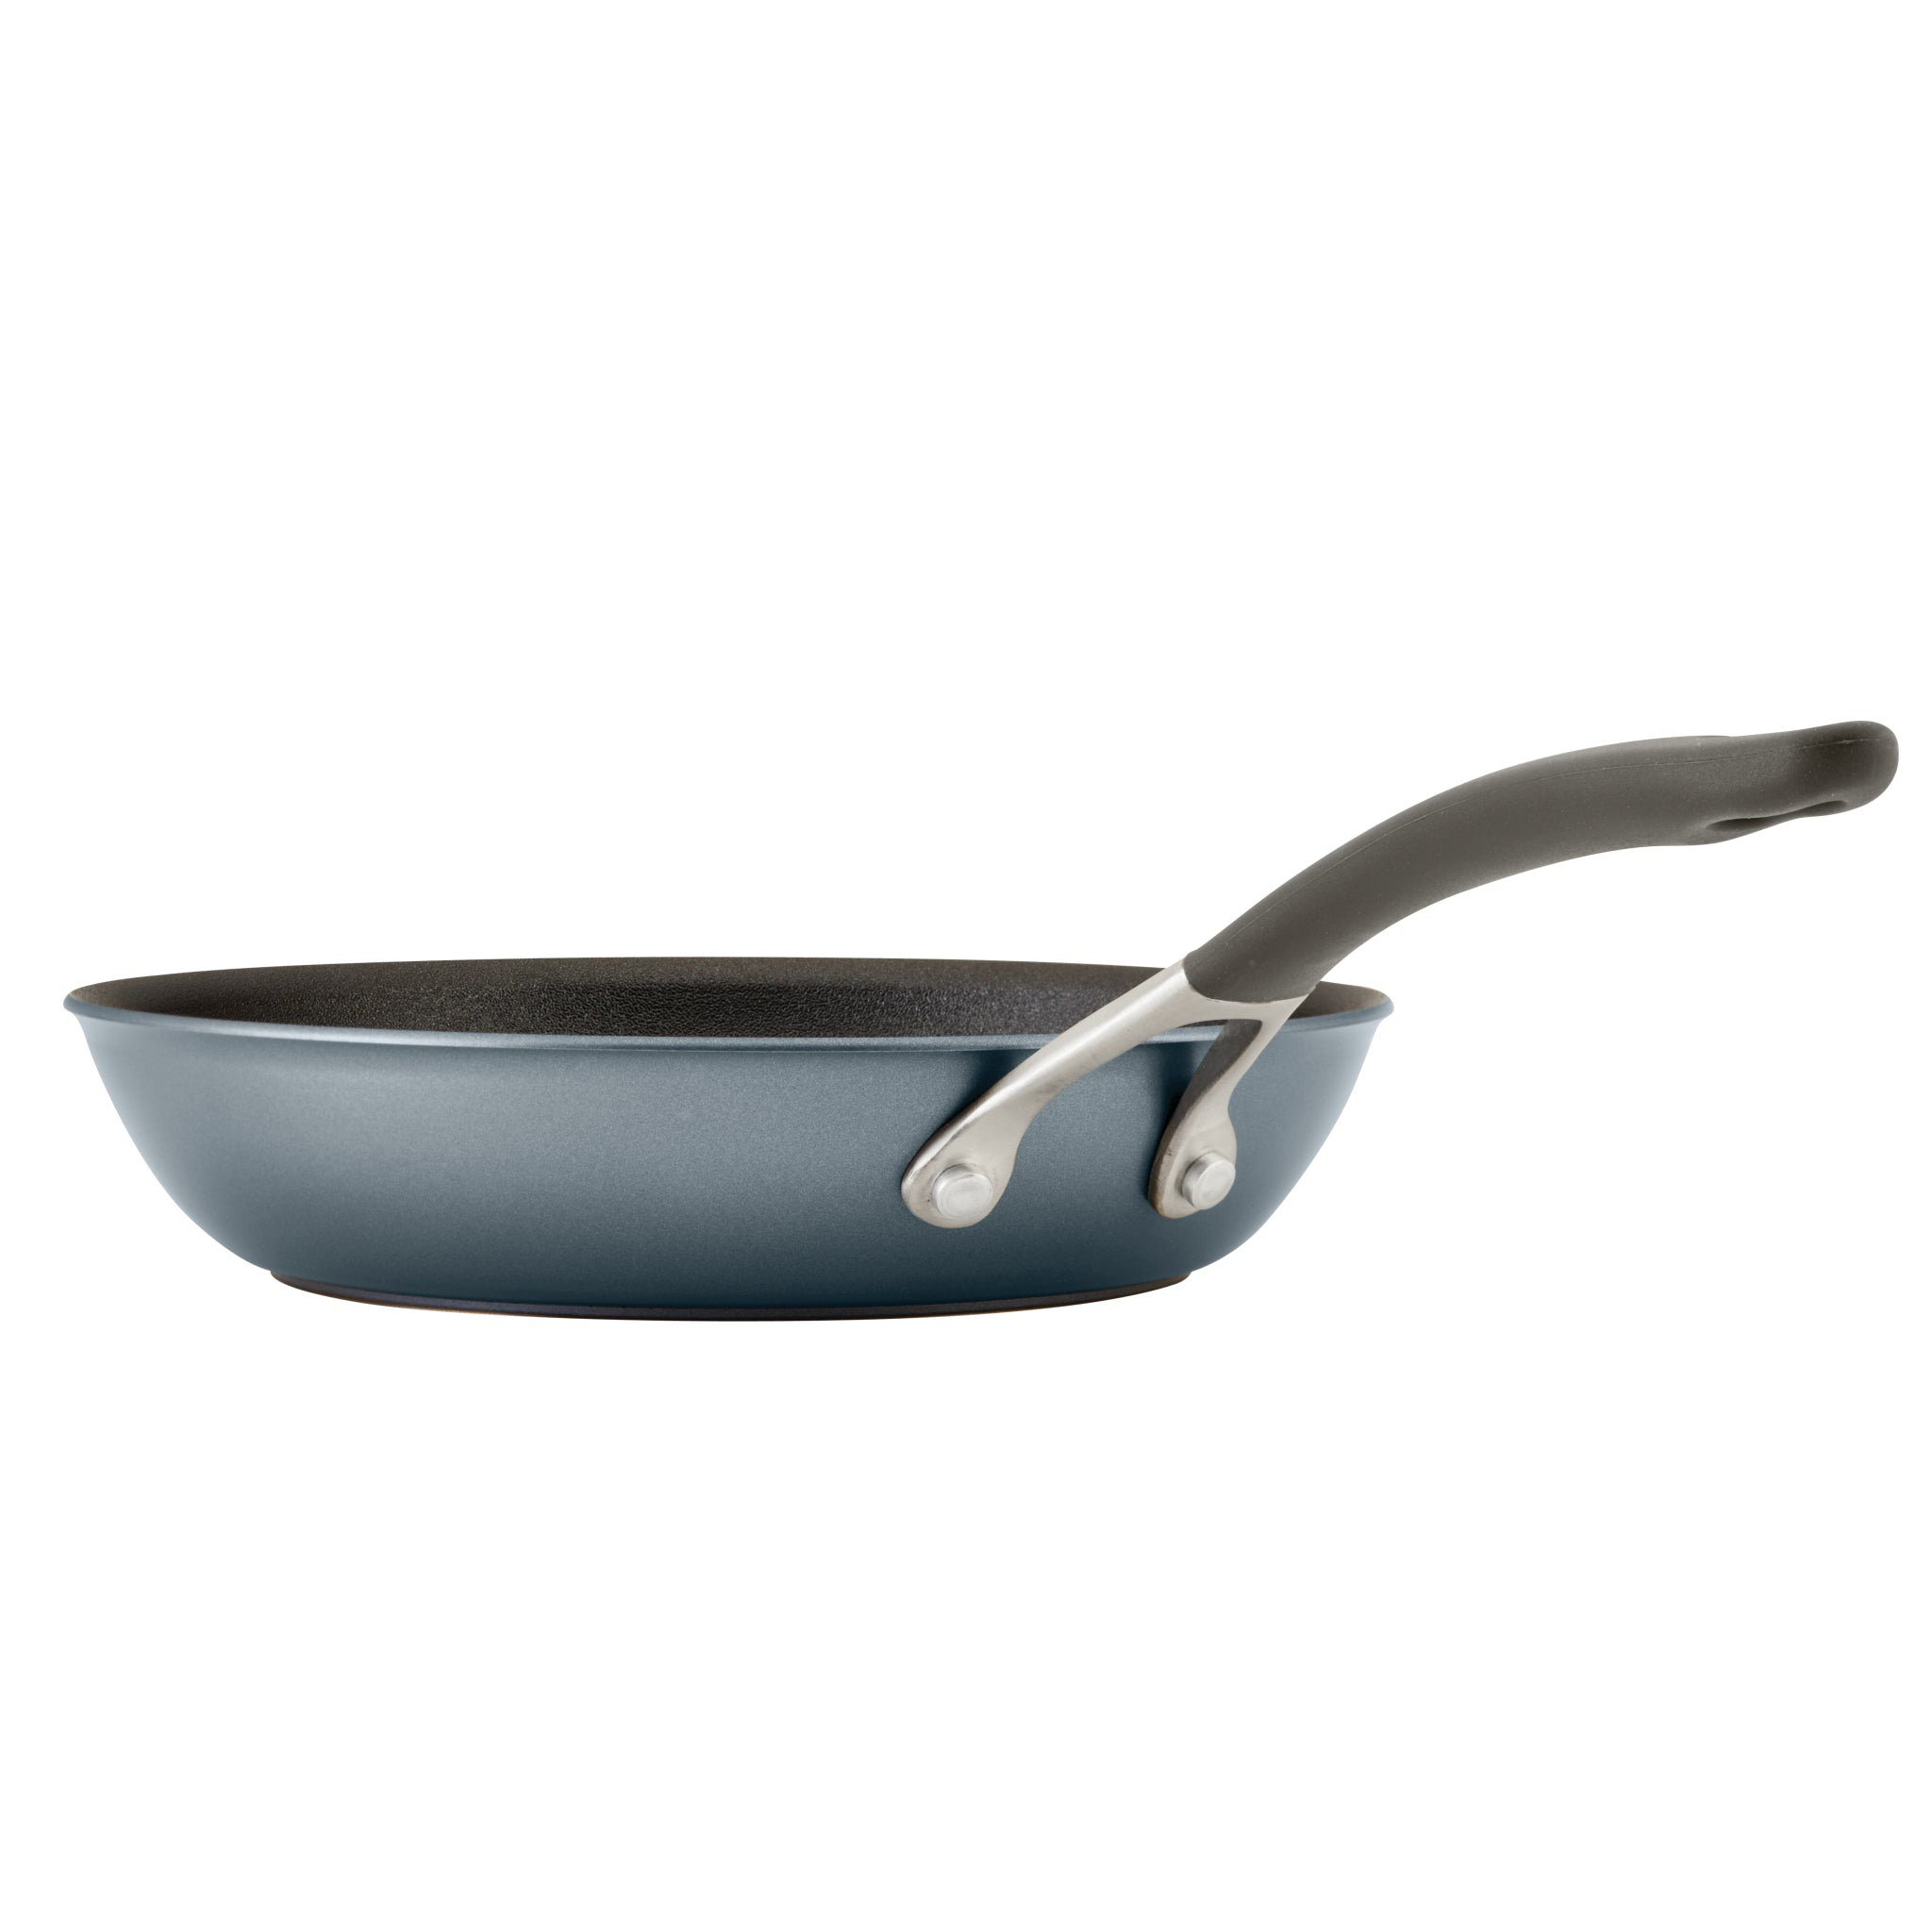 Circulon Cookware 8.5 and 10 Tri-Ply Clad Nonstick Frying Pan